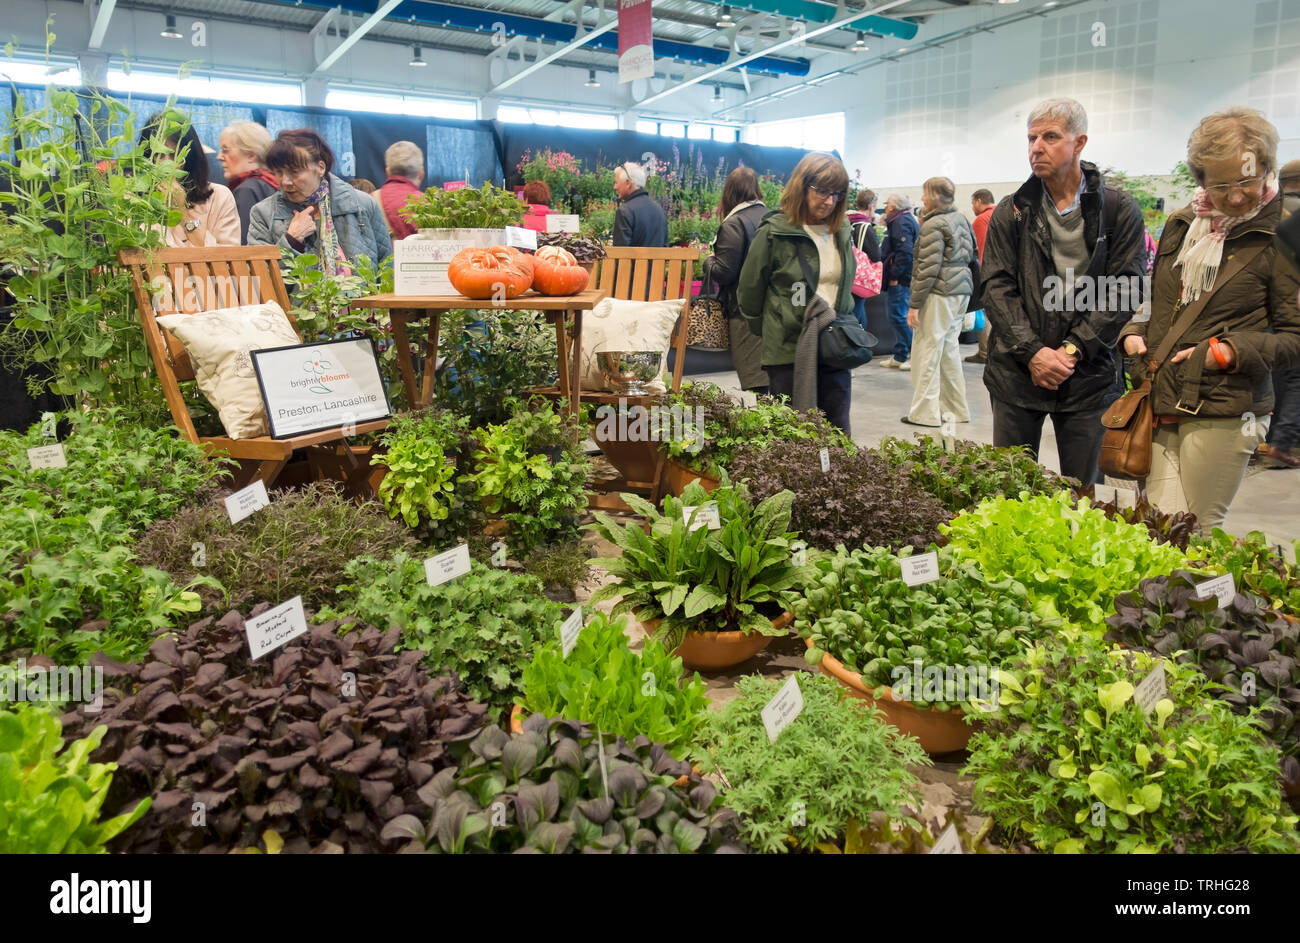 People looking at plant plants on display at the Spring Flower Show Harrogate North Yorkshire England UK United Kingdom GB Great Britain Stock Photo